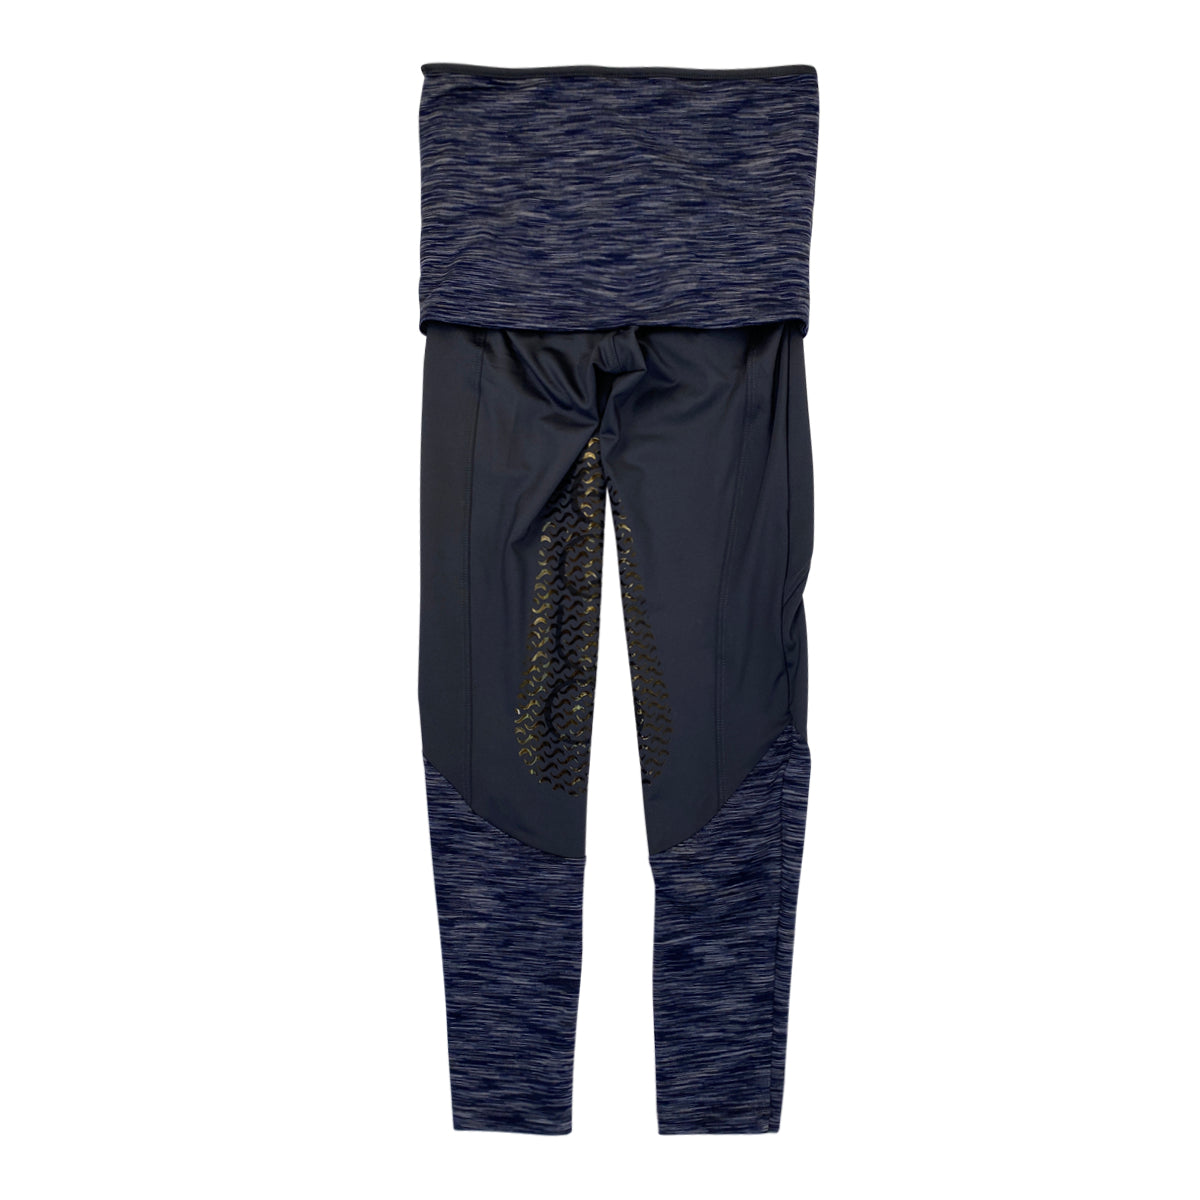 Equo Schooling Pant in Grey/Blue Stripes